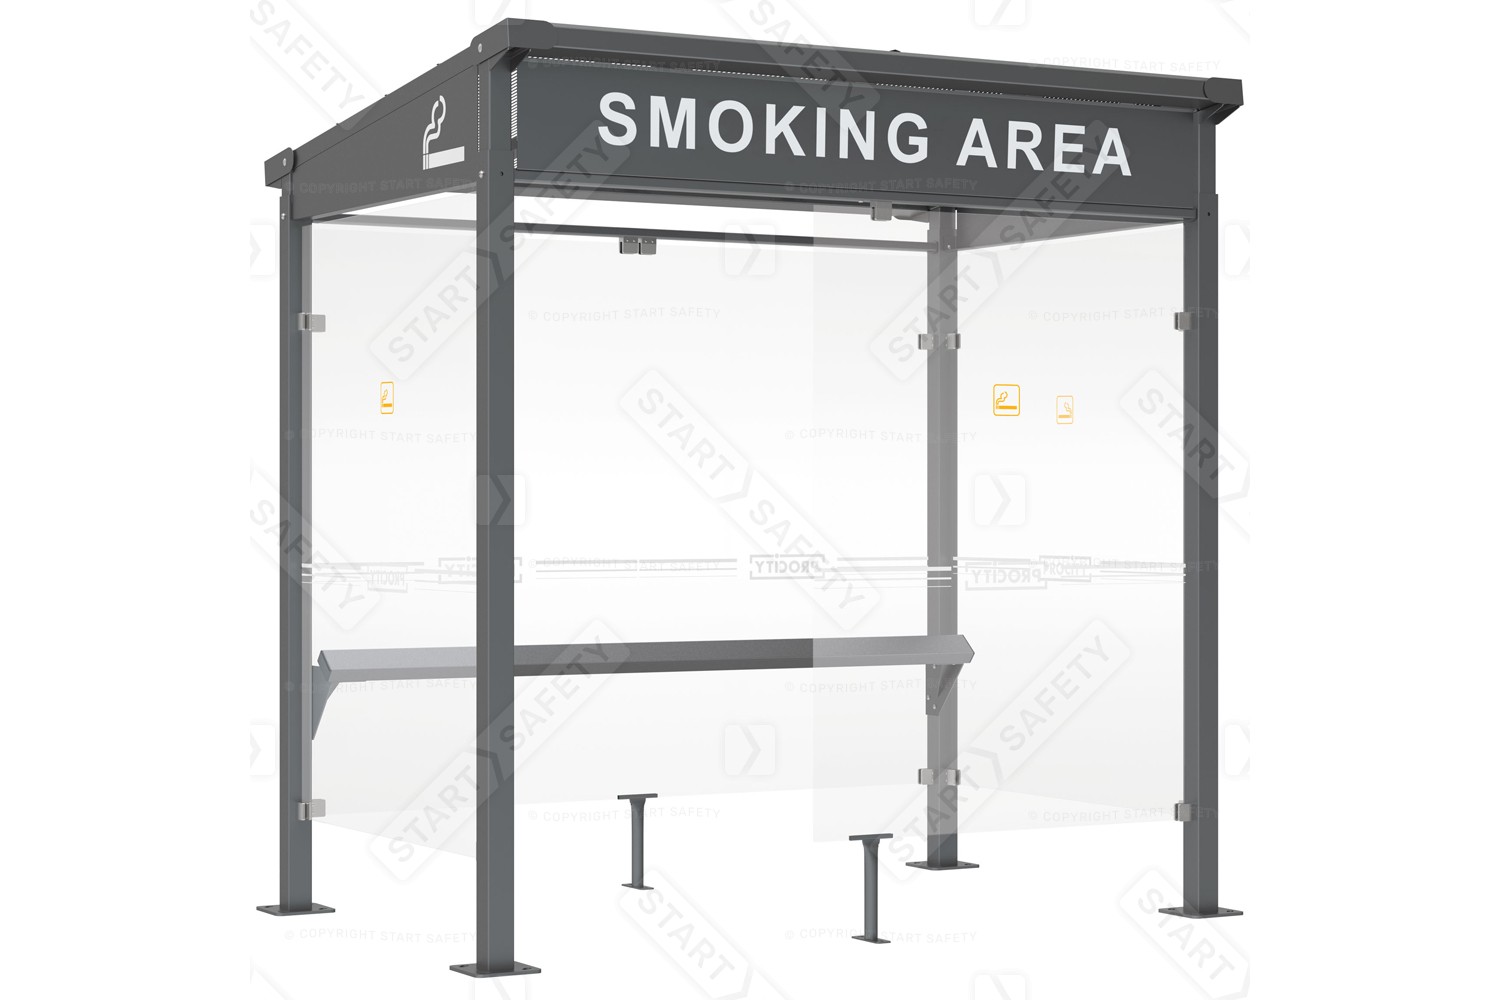 Integrated Perch Bench Inside Smoking Shelter